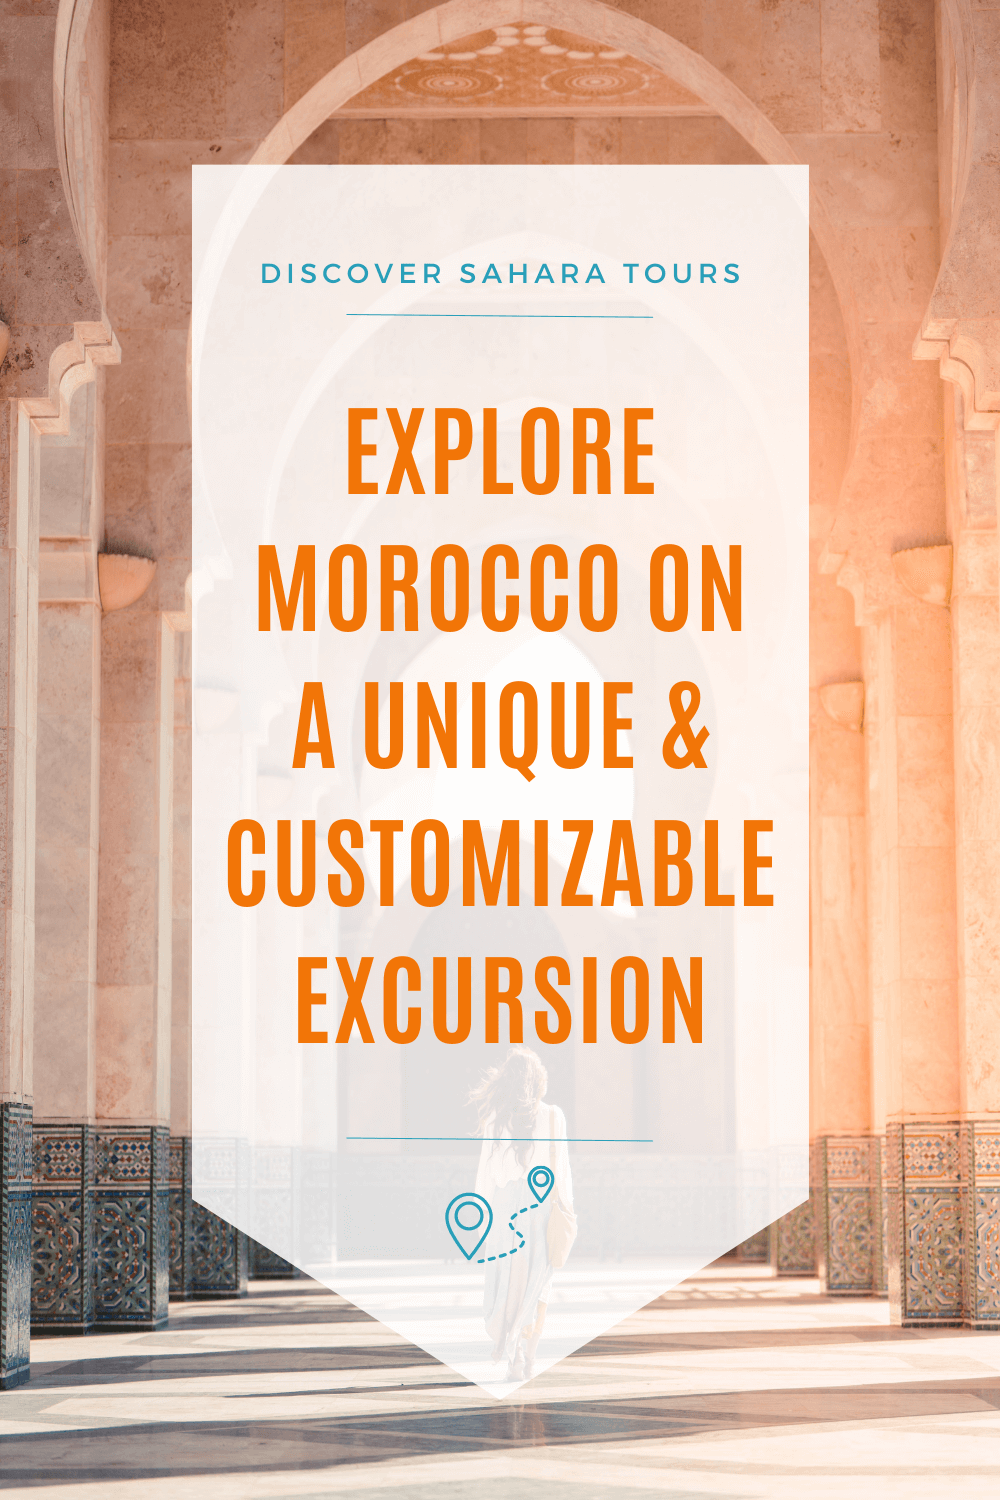 Featured image for “Explore Morocco on a Unique & Customizable Excursion with Discover Sahara Tours”